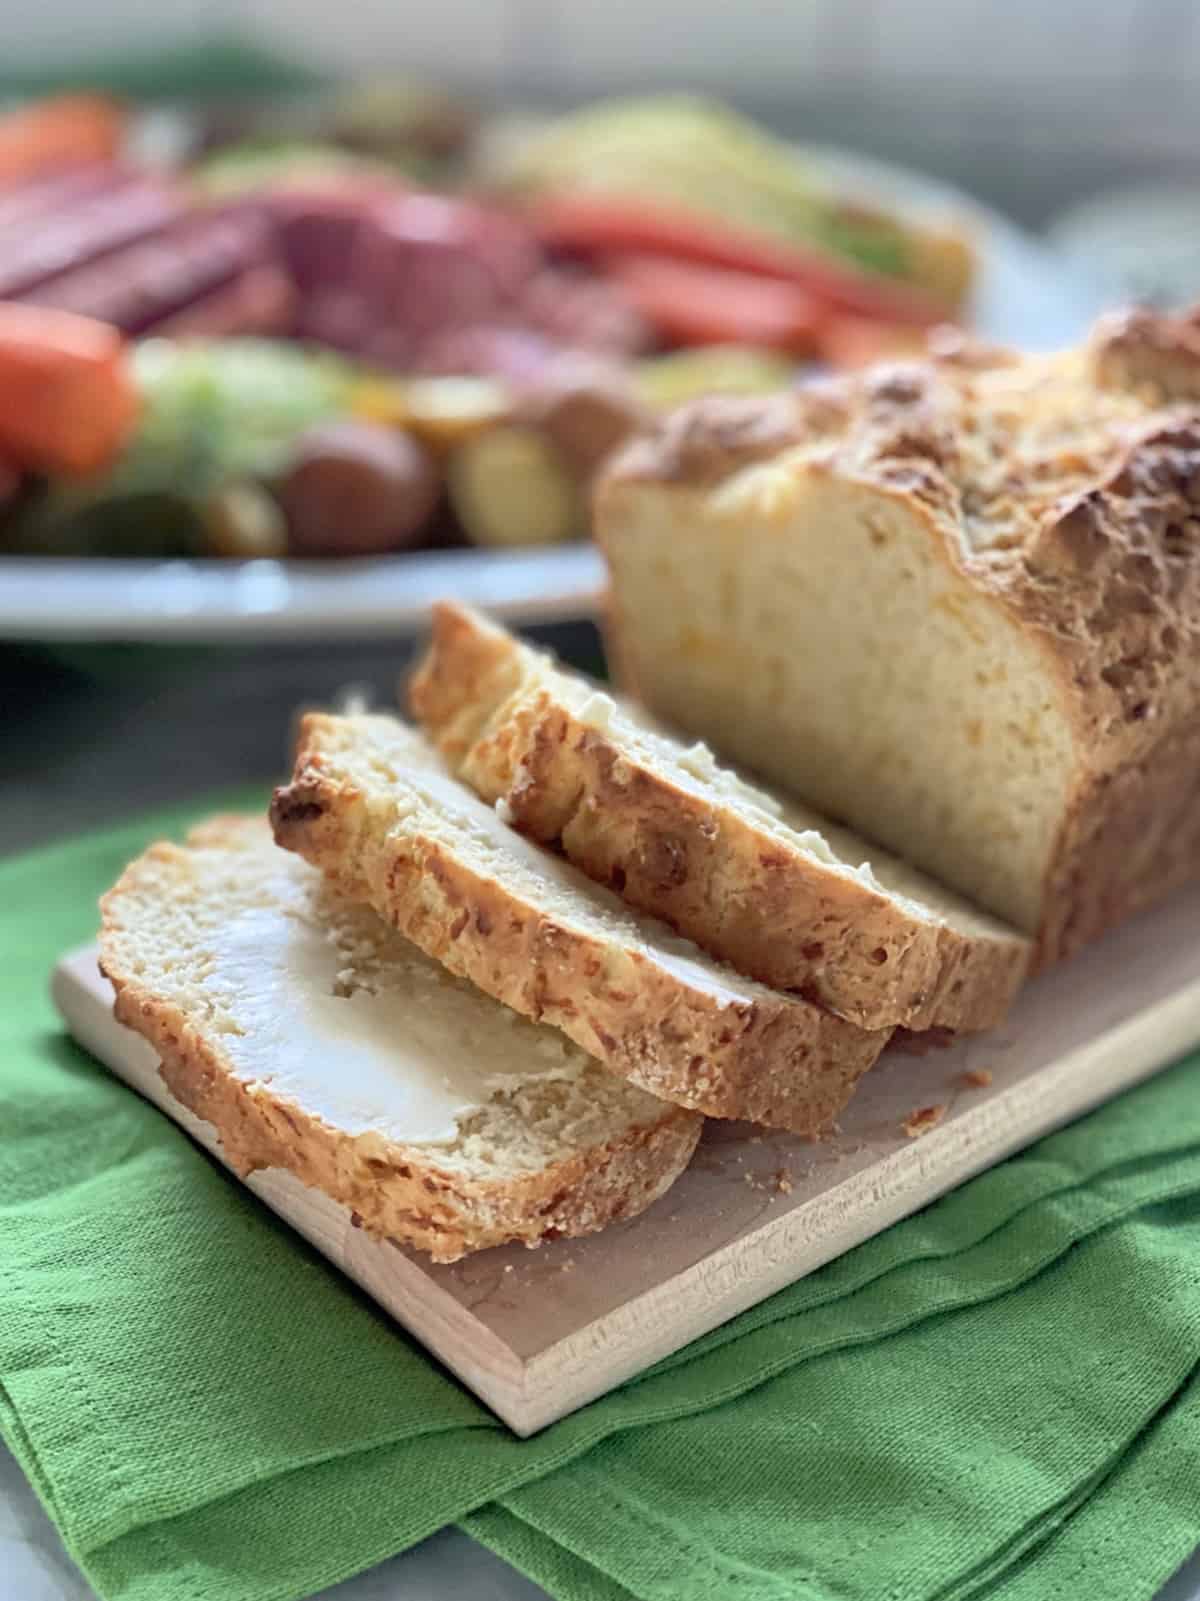 Three slices of bread cut from a loaf with dinner in the background.